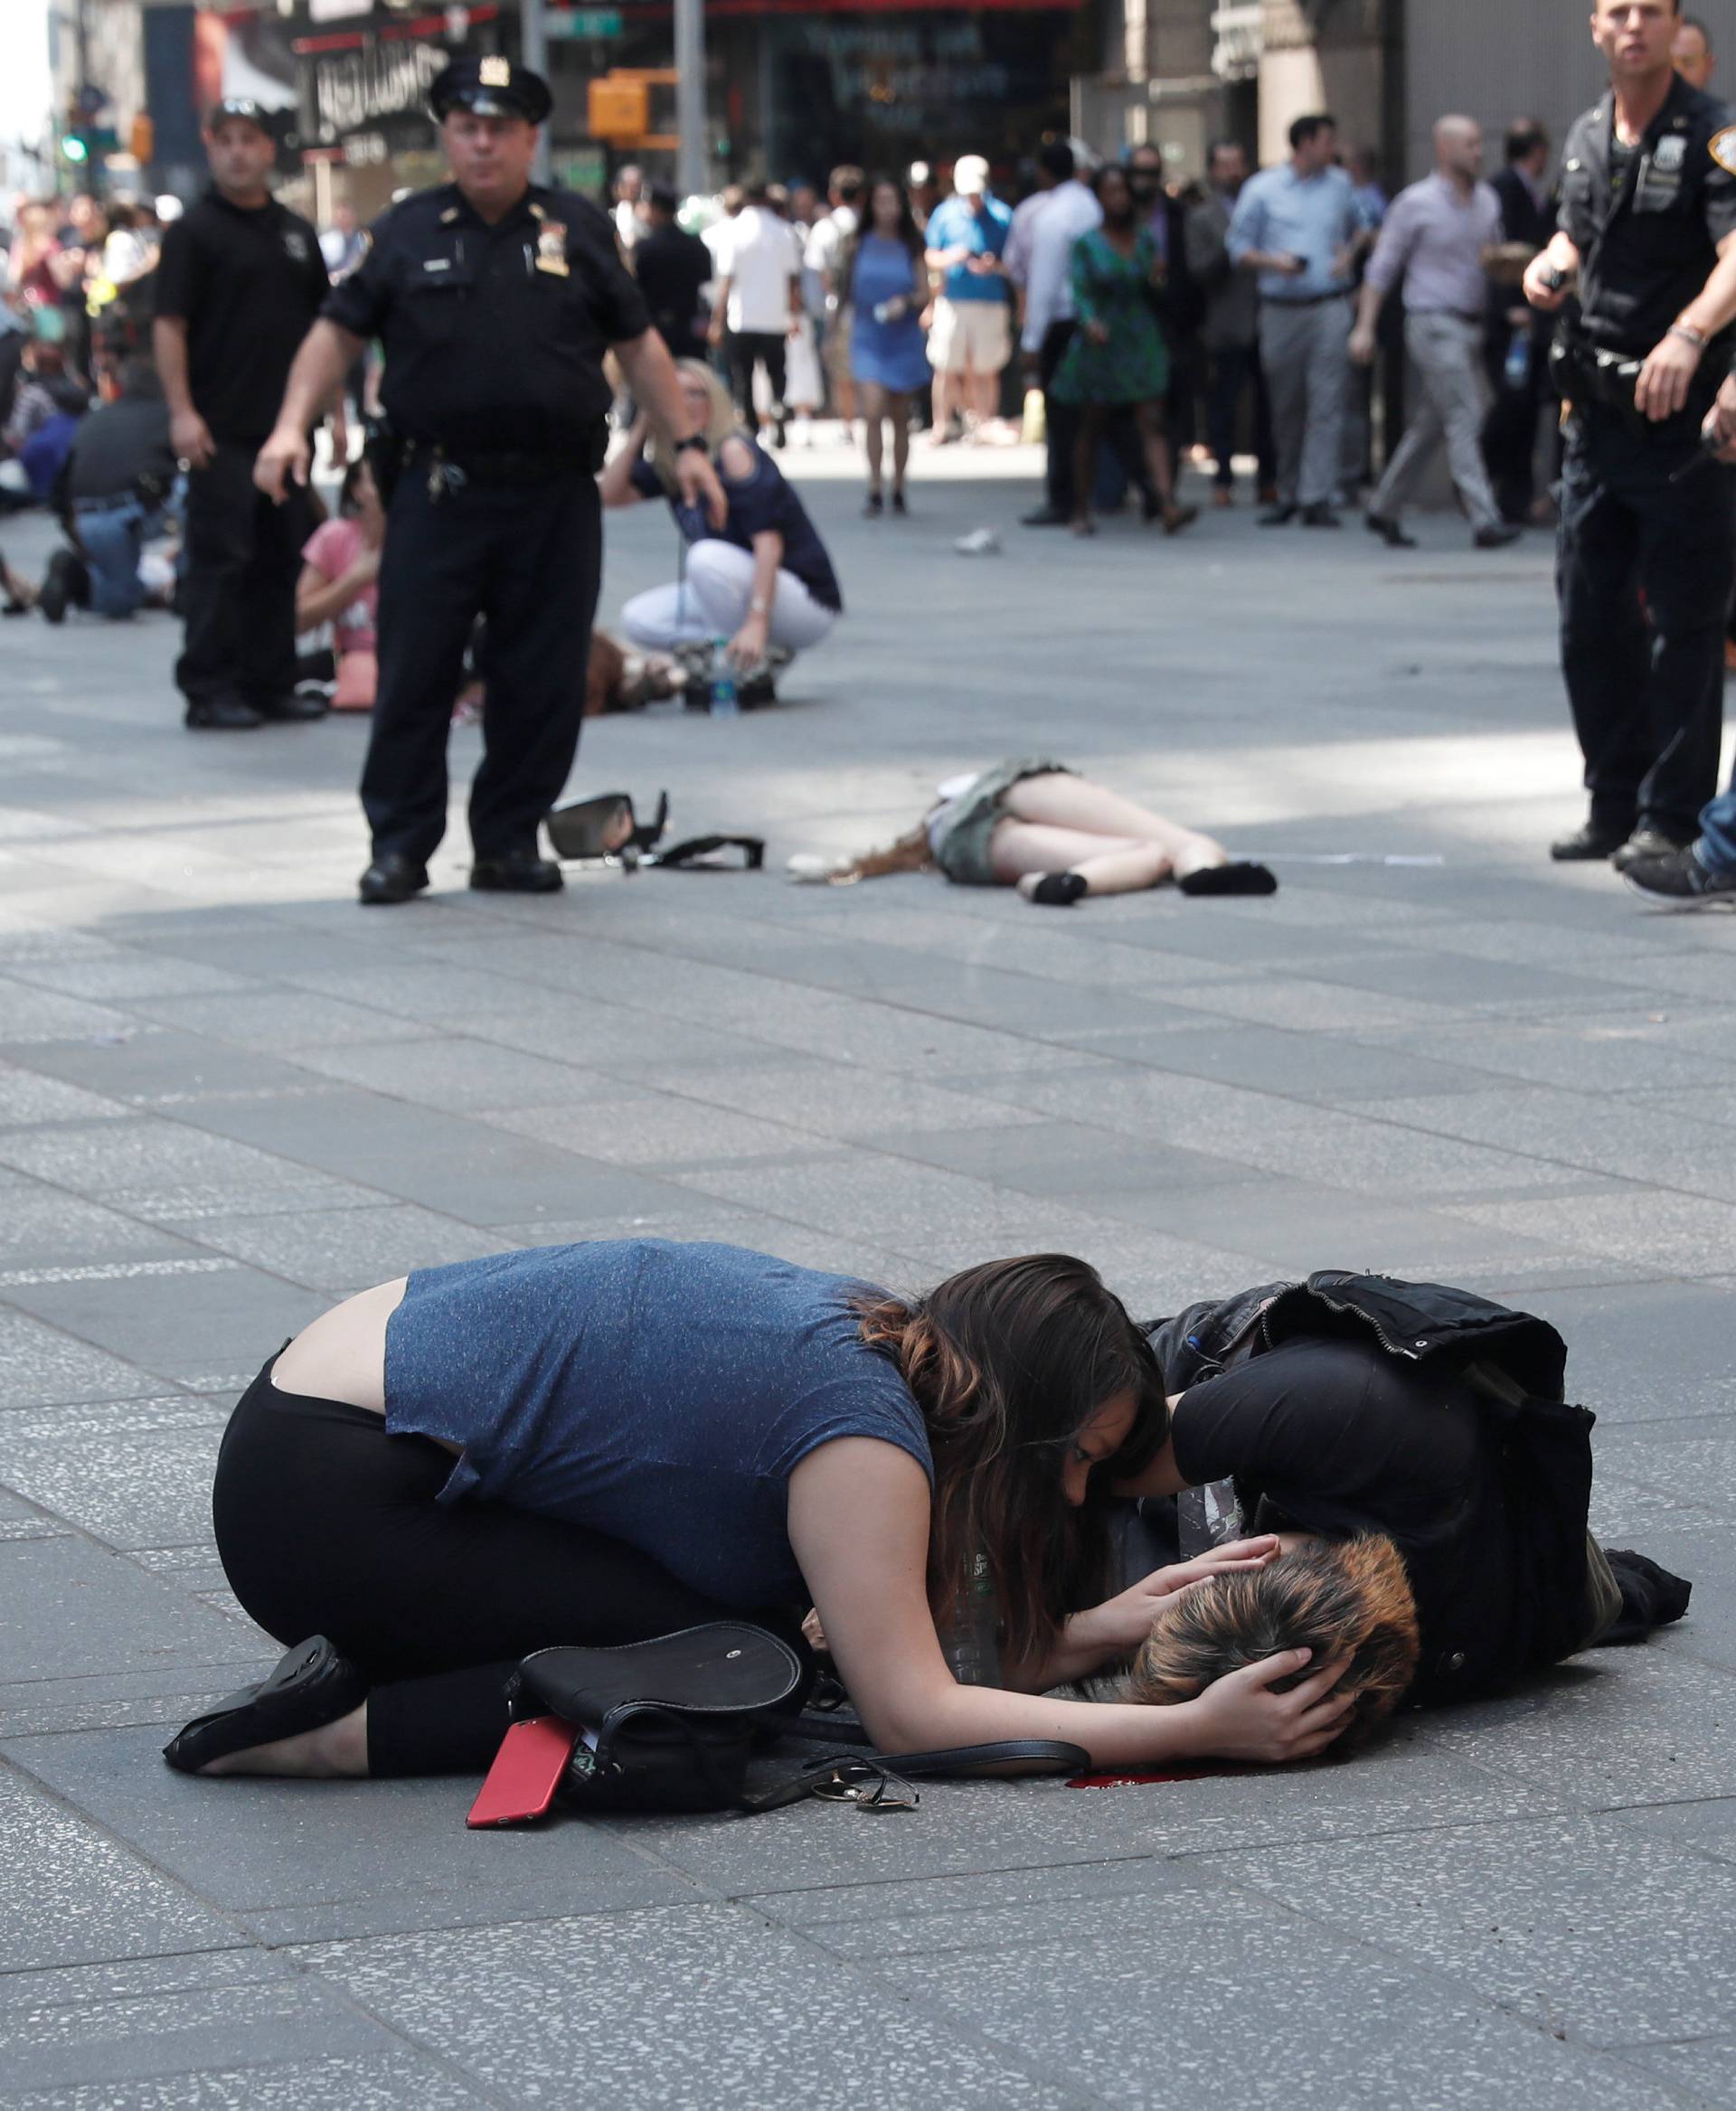 Injured people are seen on the sidewalk in Times Square after a speeding vehicle struck pedestrians on the sidewalk in New York City